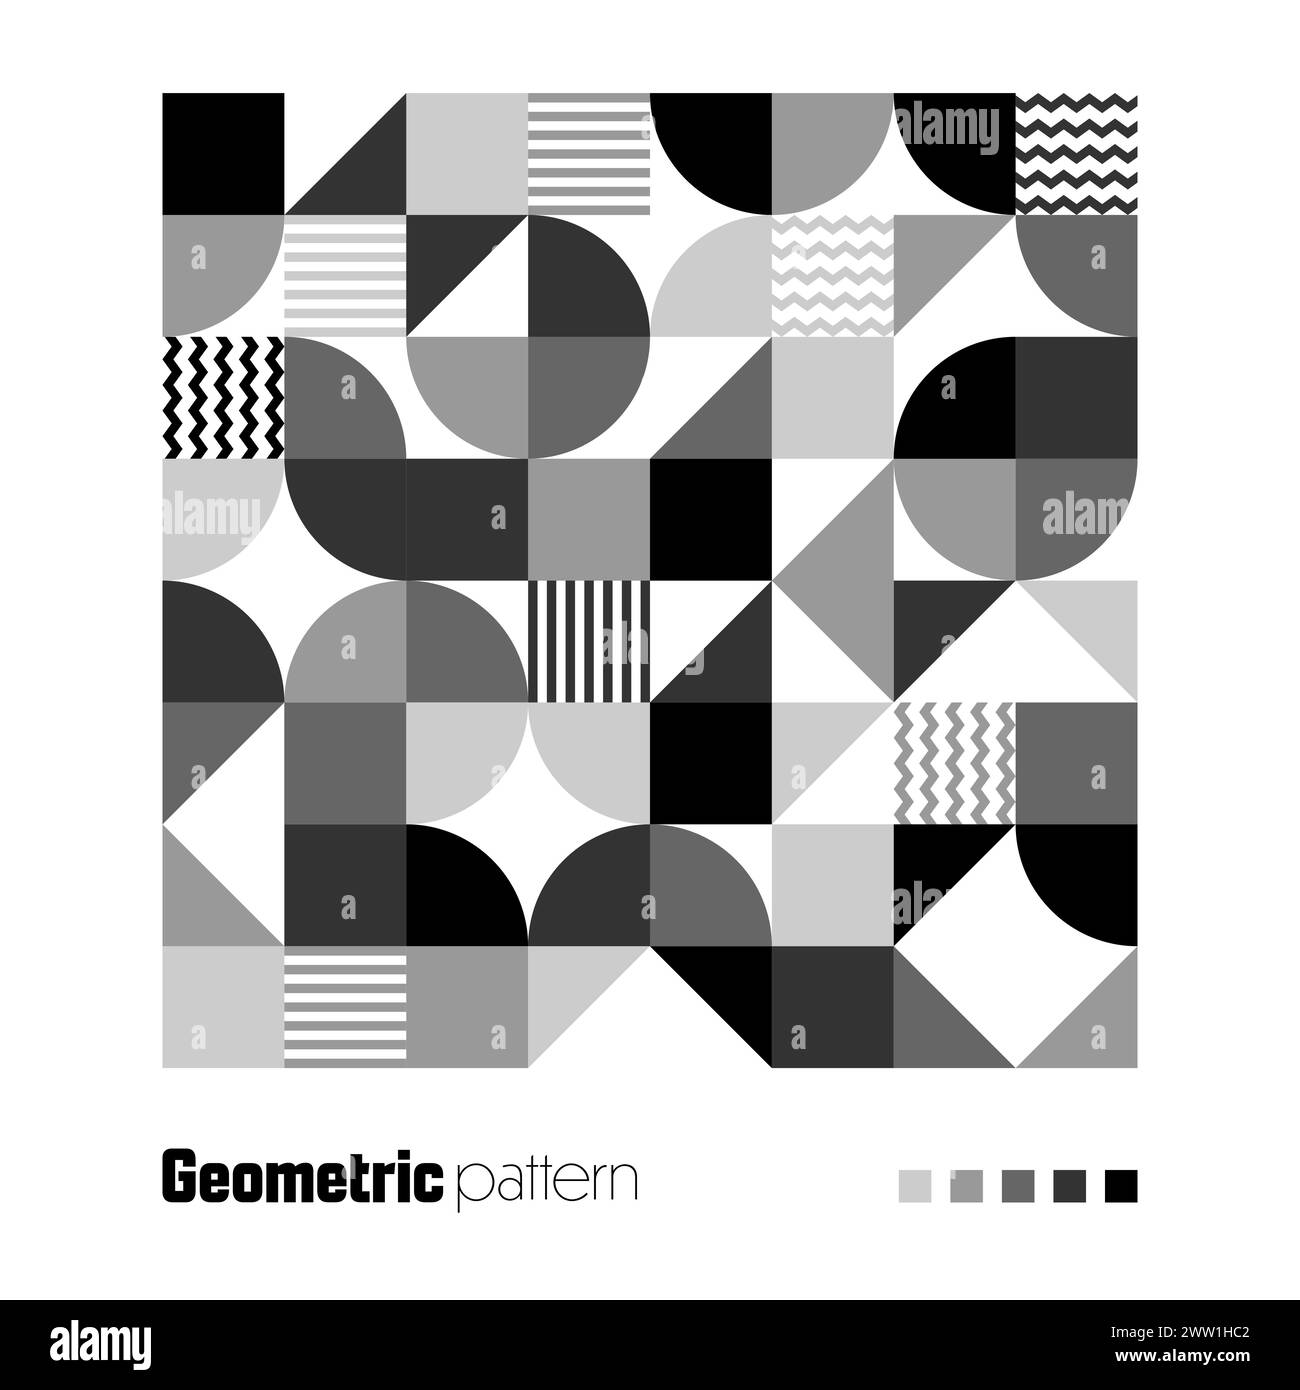 Geometric trendy pattern. Modern background with simple elements. Retro texture with basic geometric shapes. Print design, minimalist poster cover Stock Vector